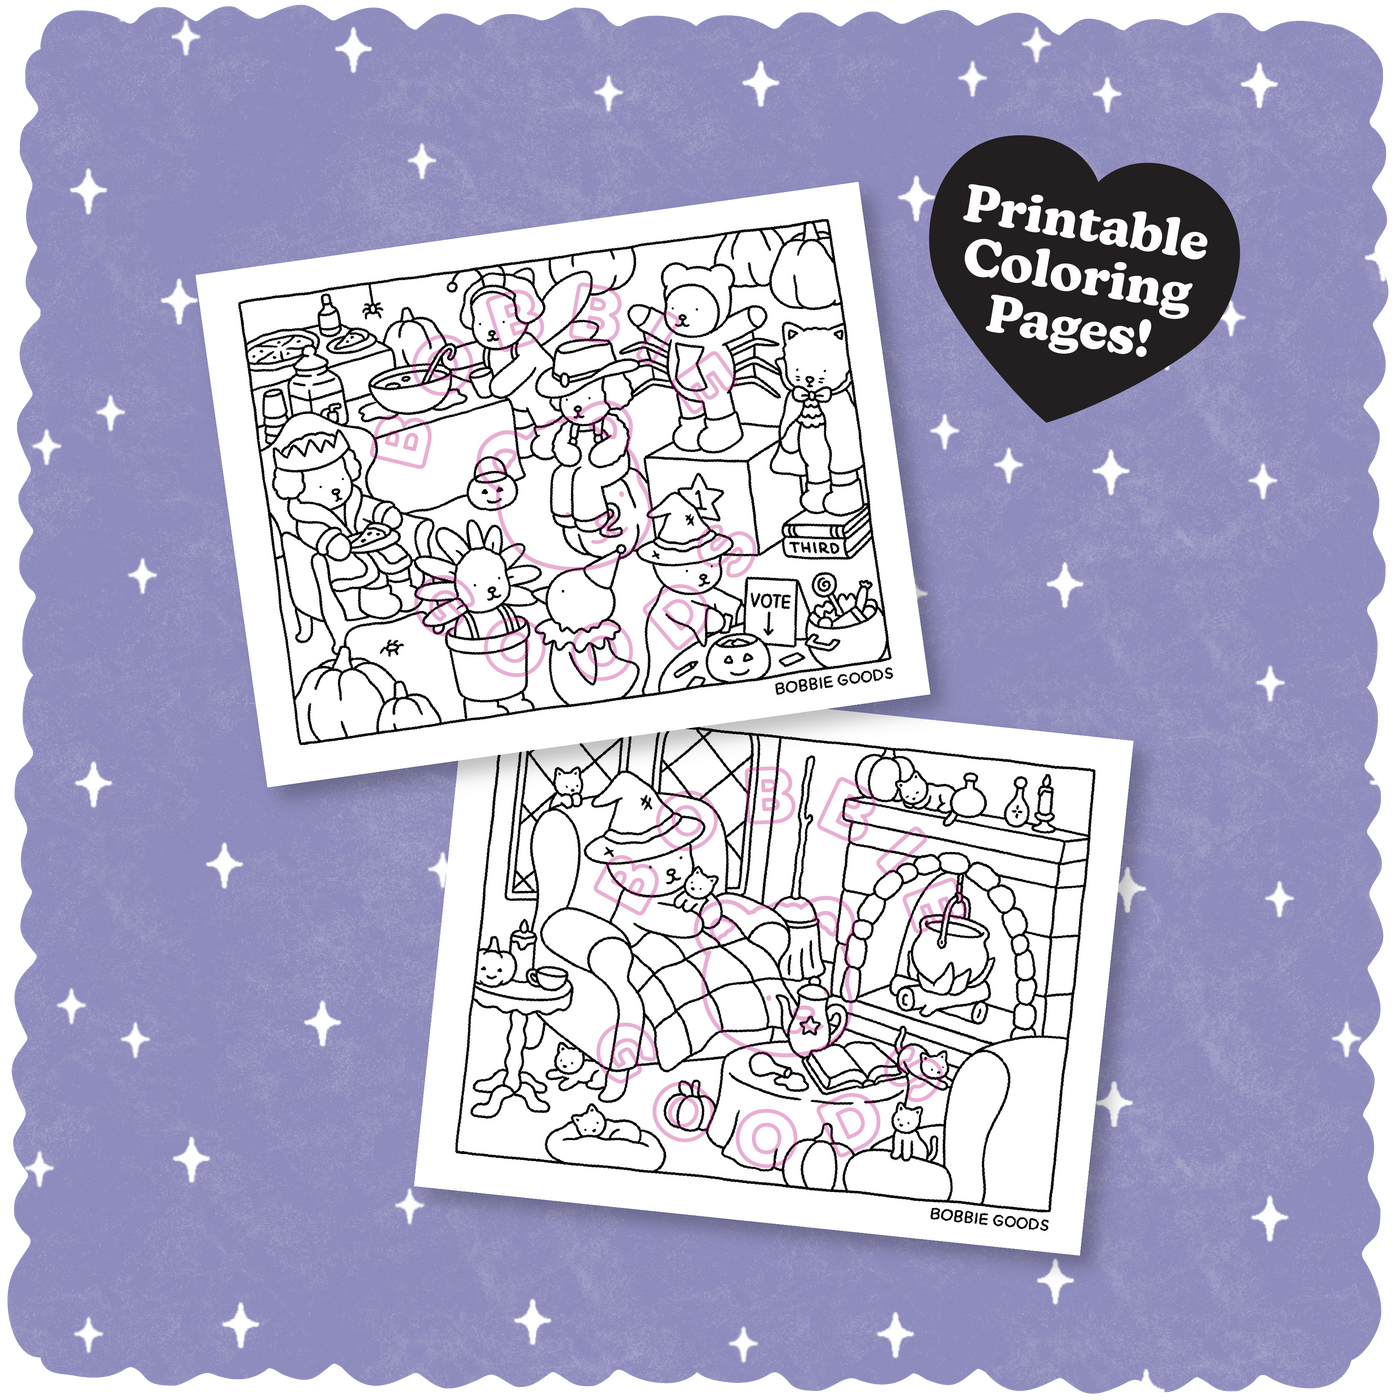 Halloween Coloring Pages: Free & Printable Coloring Pages